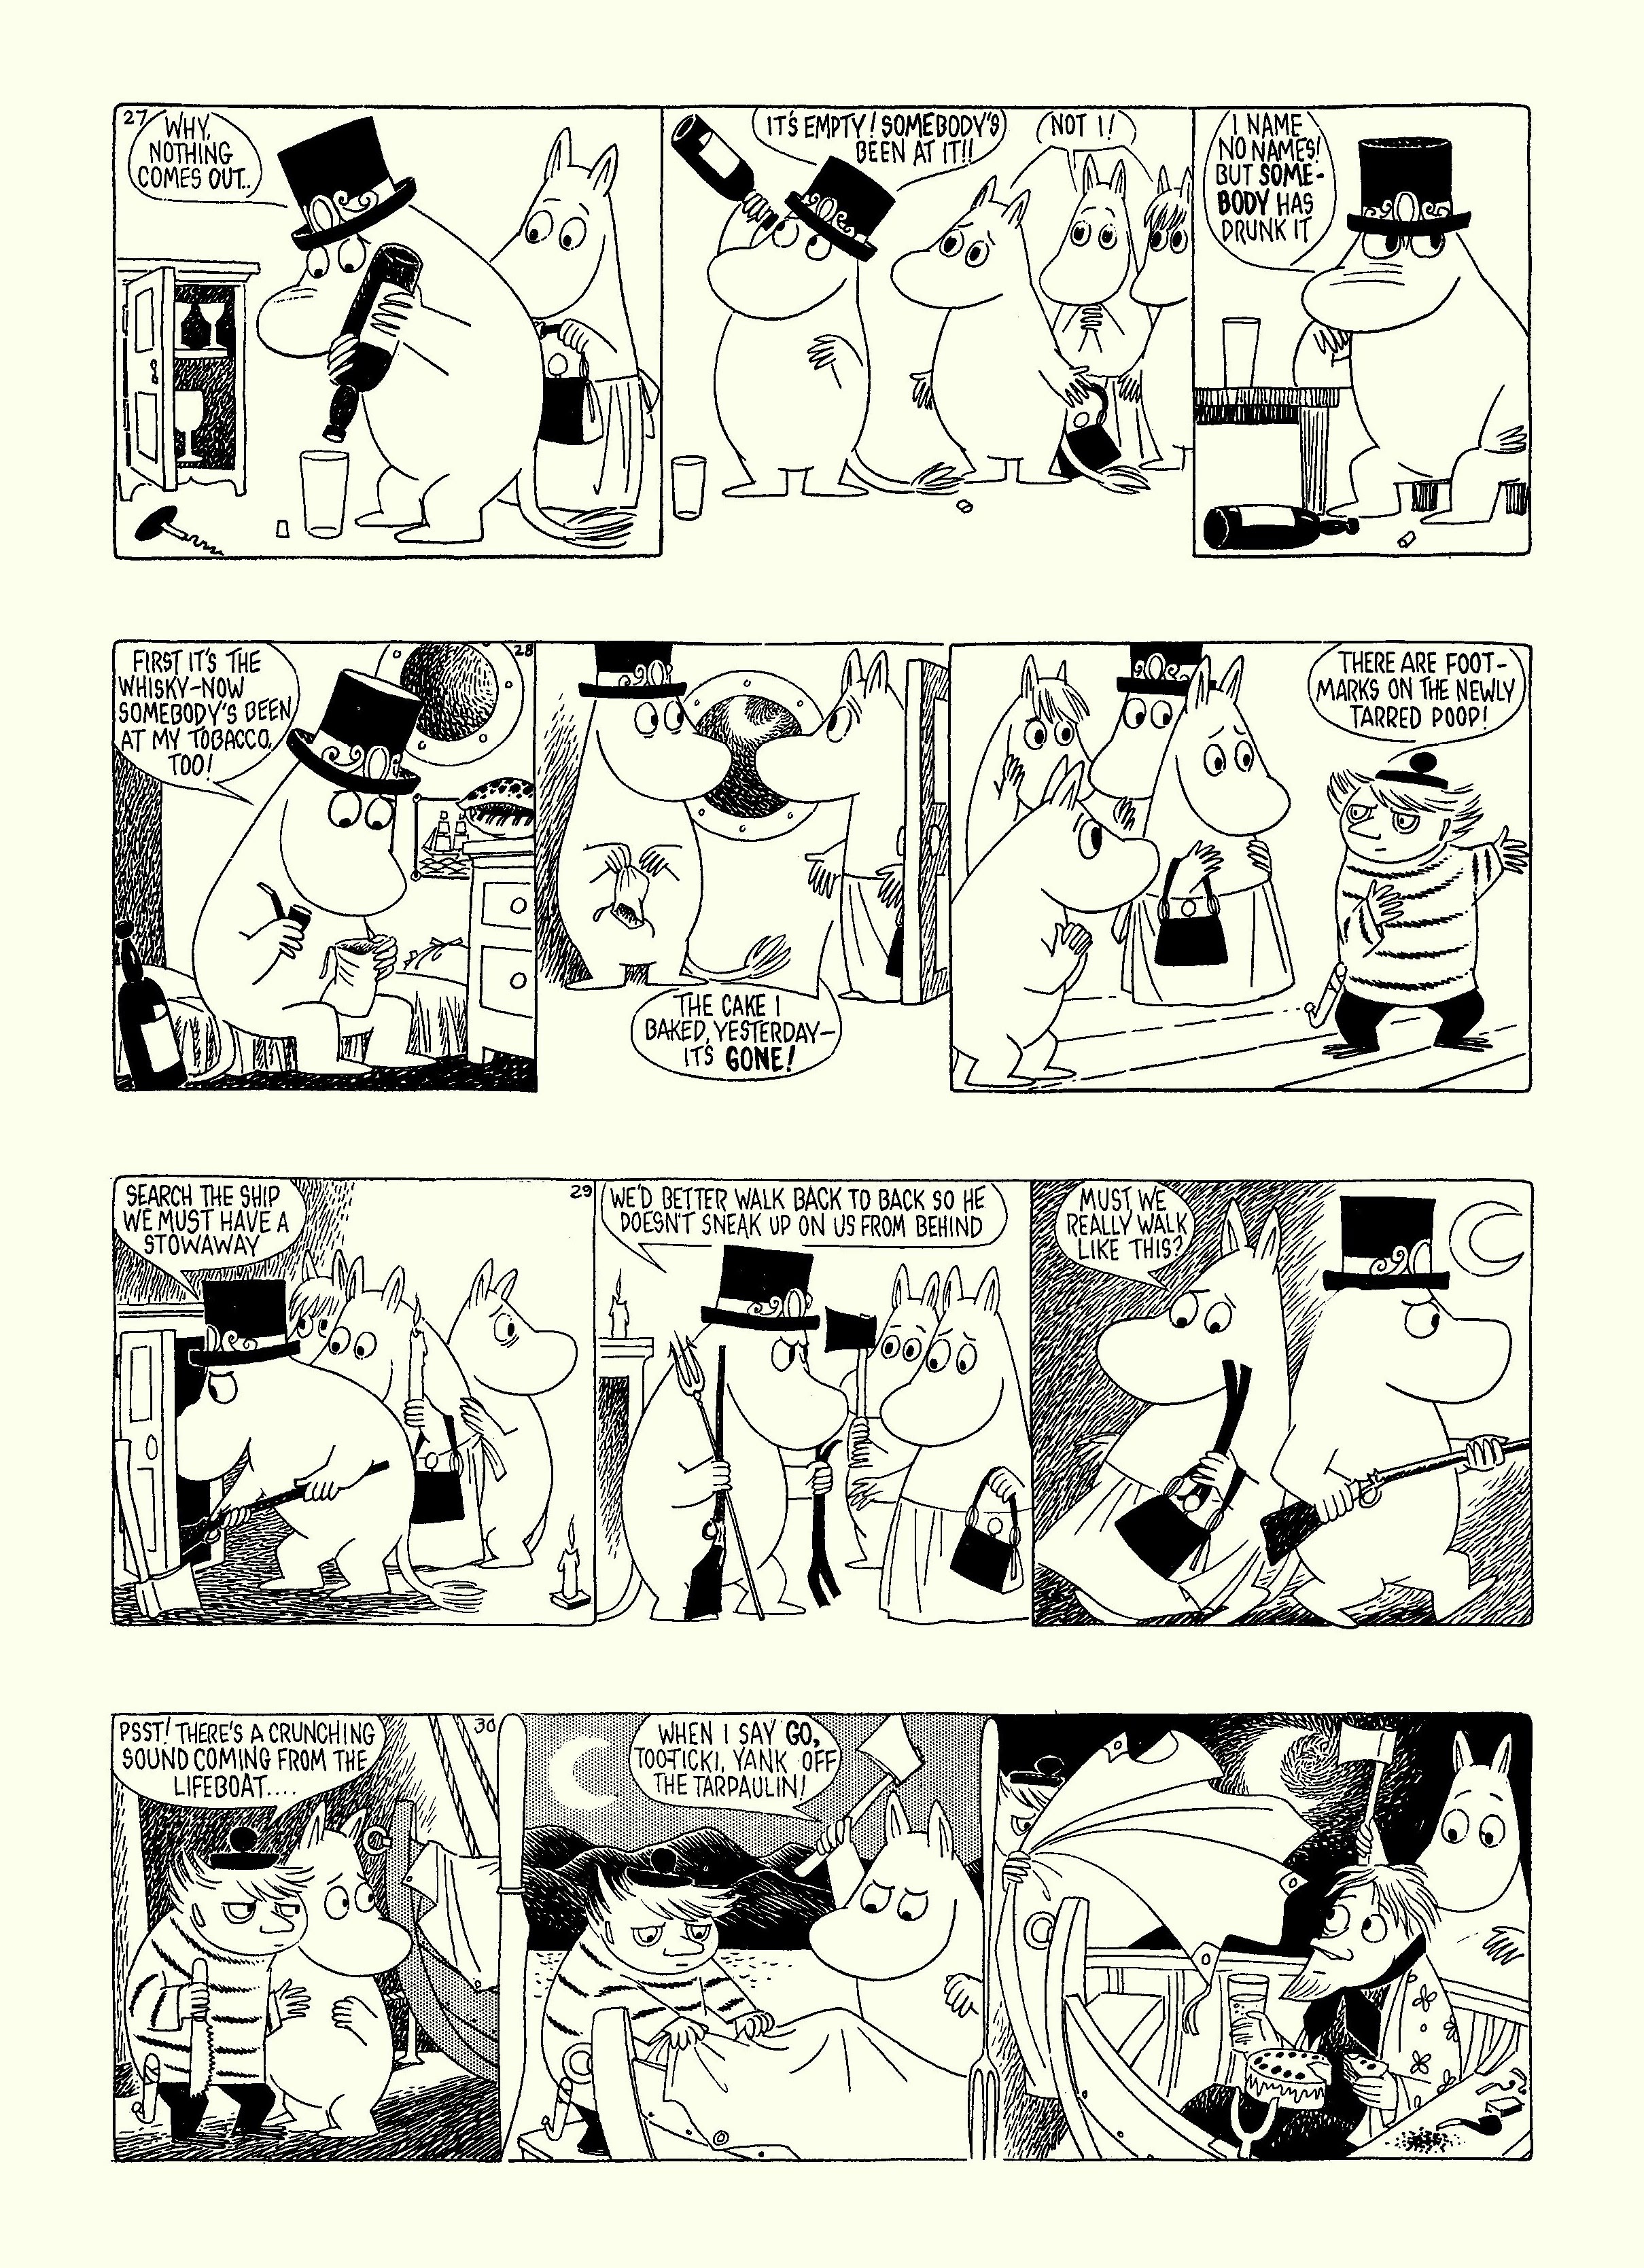 Read online Moomin: The Complete Tove Jansson Comic Strip comic -  Issue # TPB 5 - 38